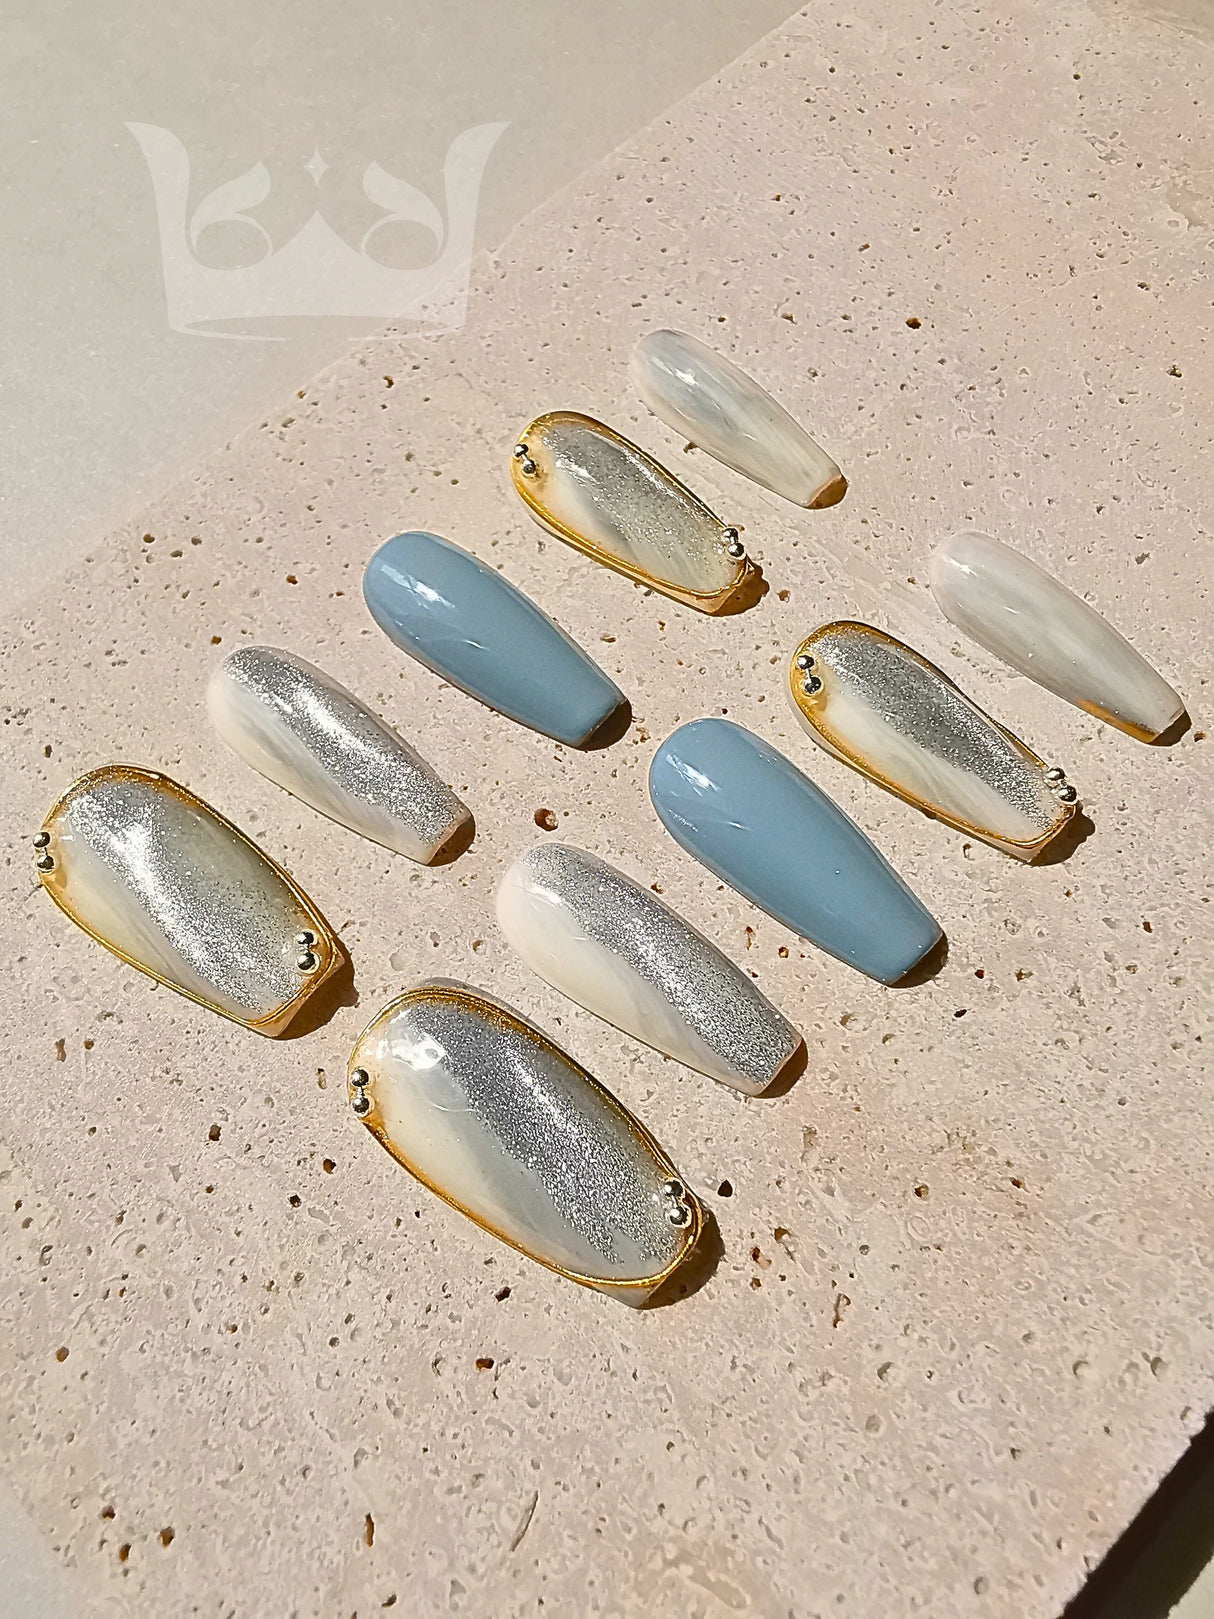 These press-on nails are designed for special occasions or fashion statements with a soft color palette, oval shape, two-tone design, metallic accent, gold detailing, and texture contrast.